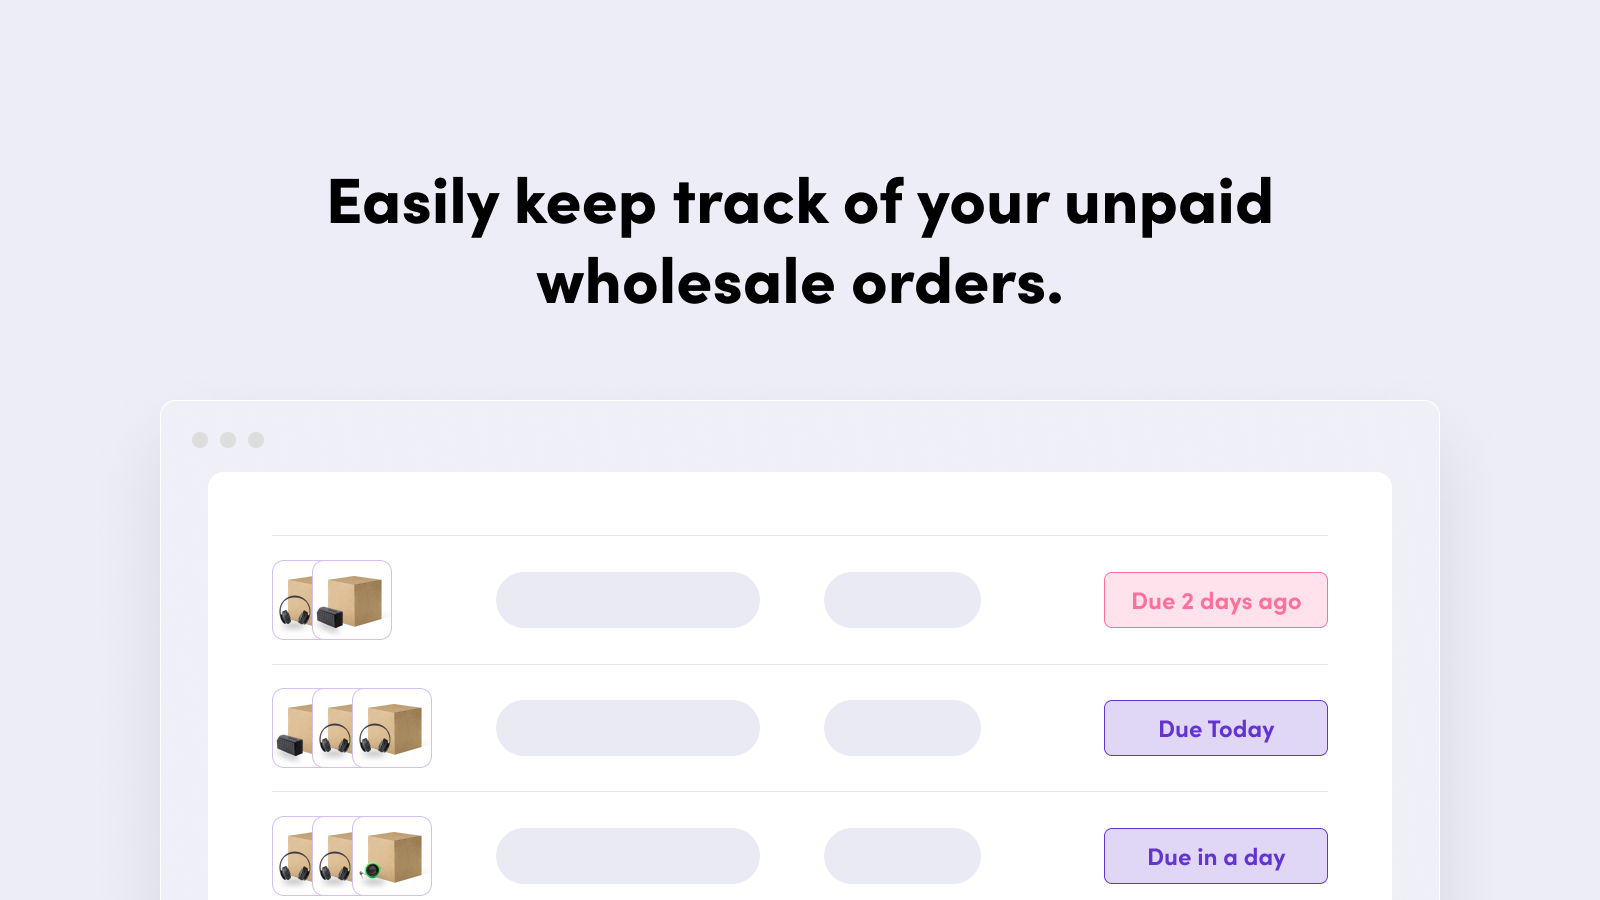 Accounts Receivables - easily keep track of unpaid orders